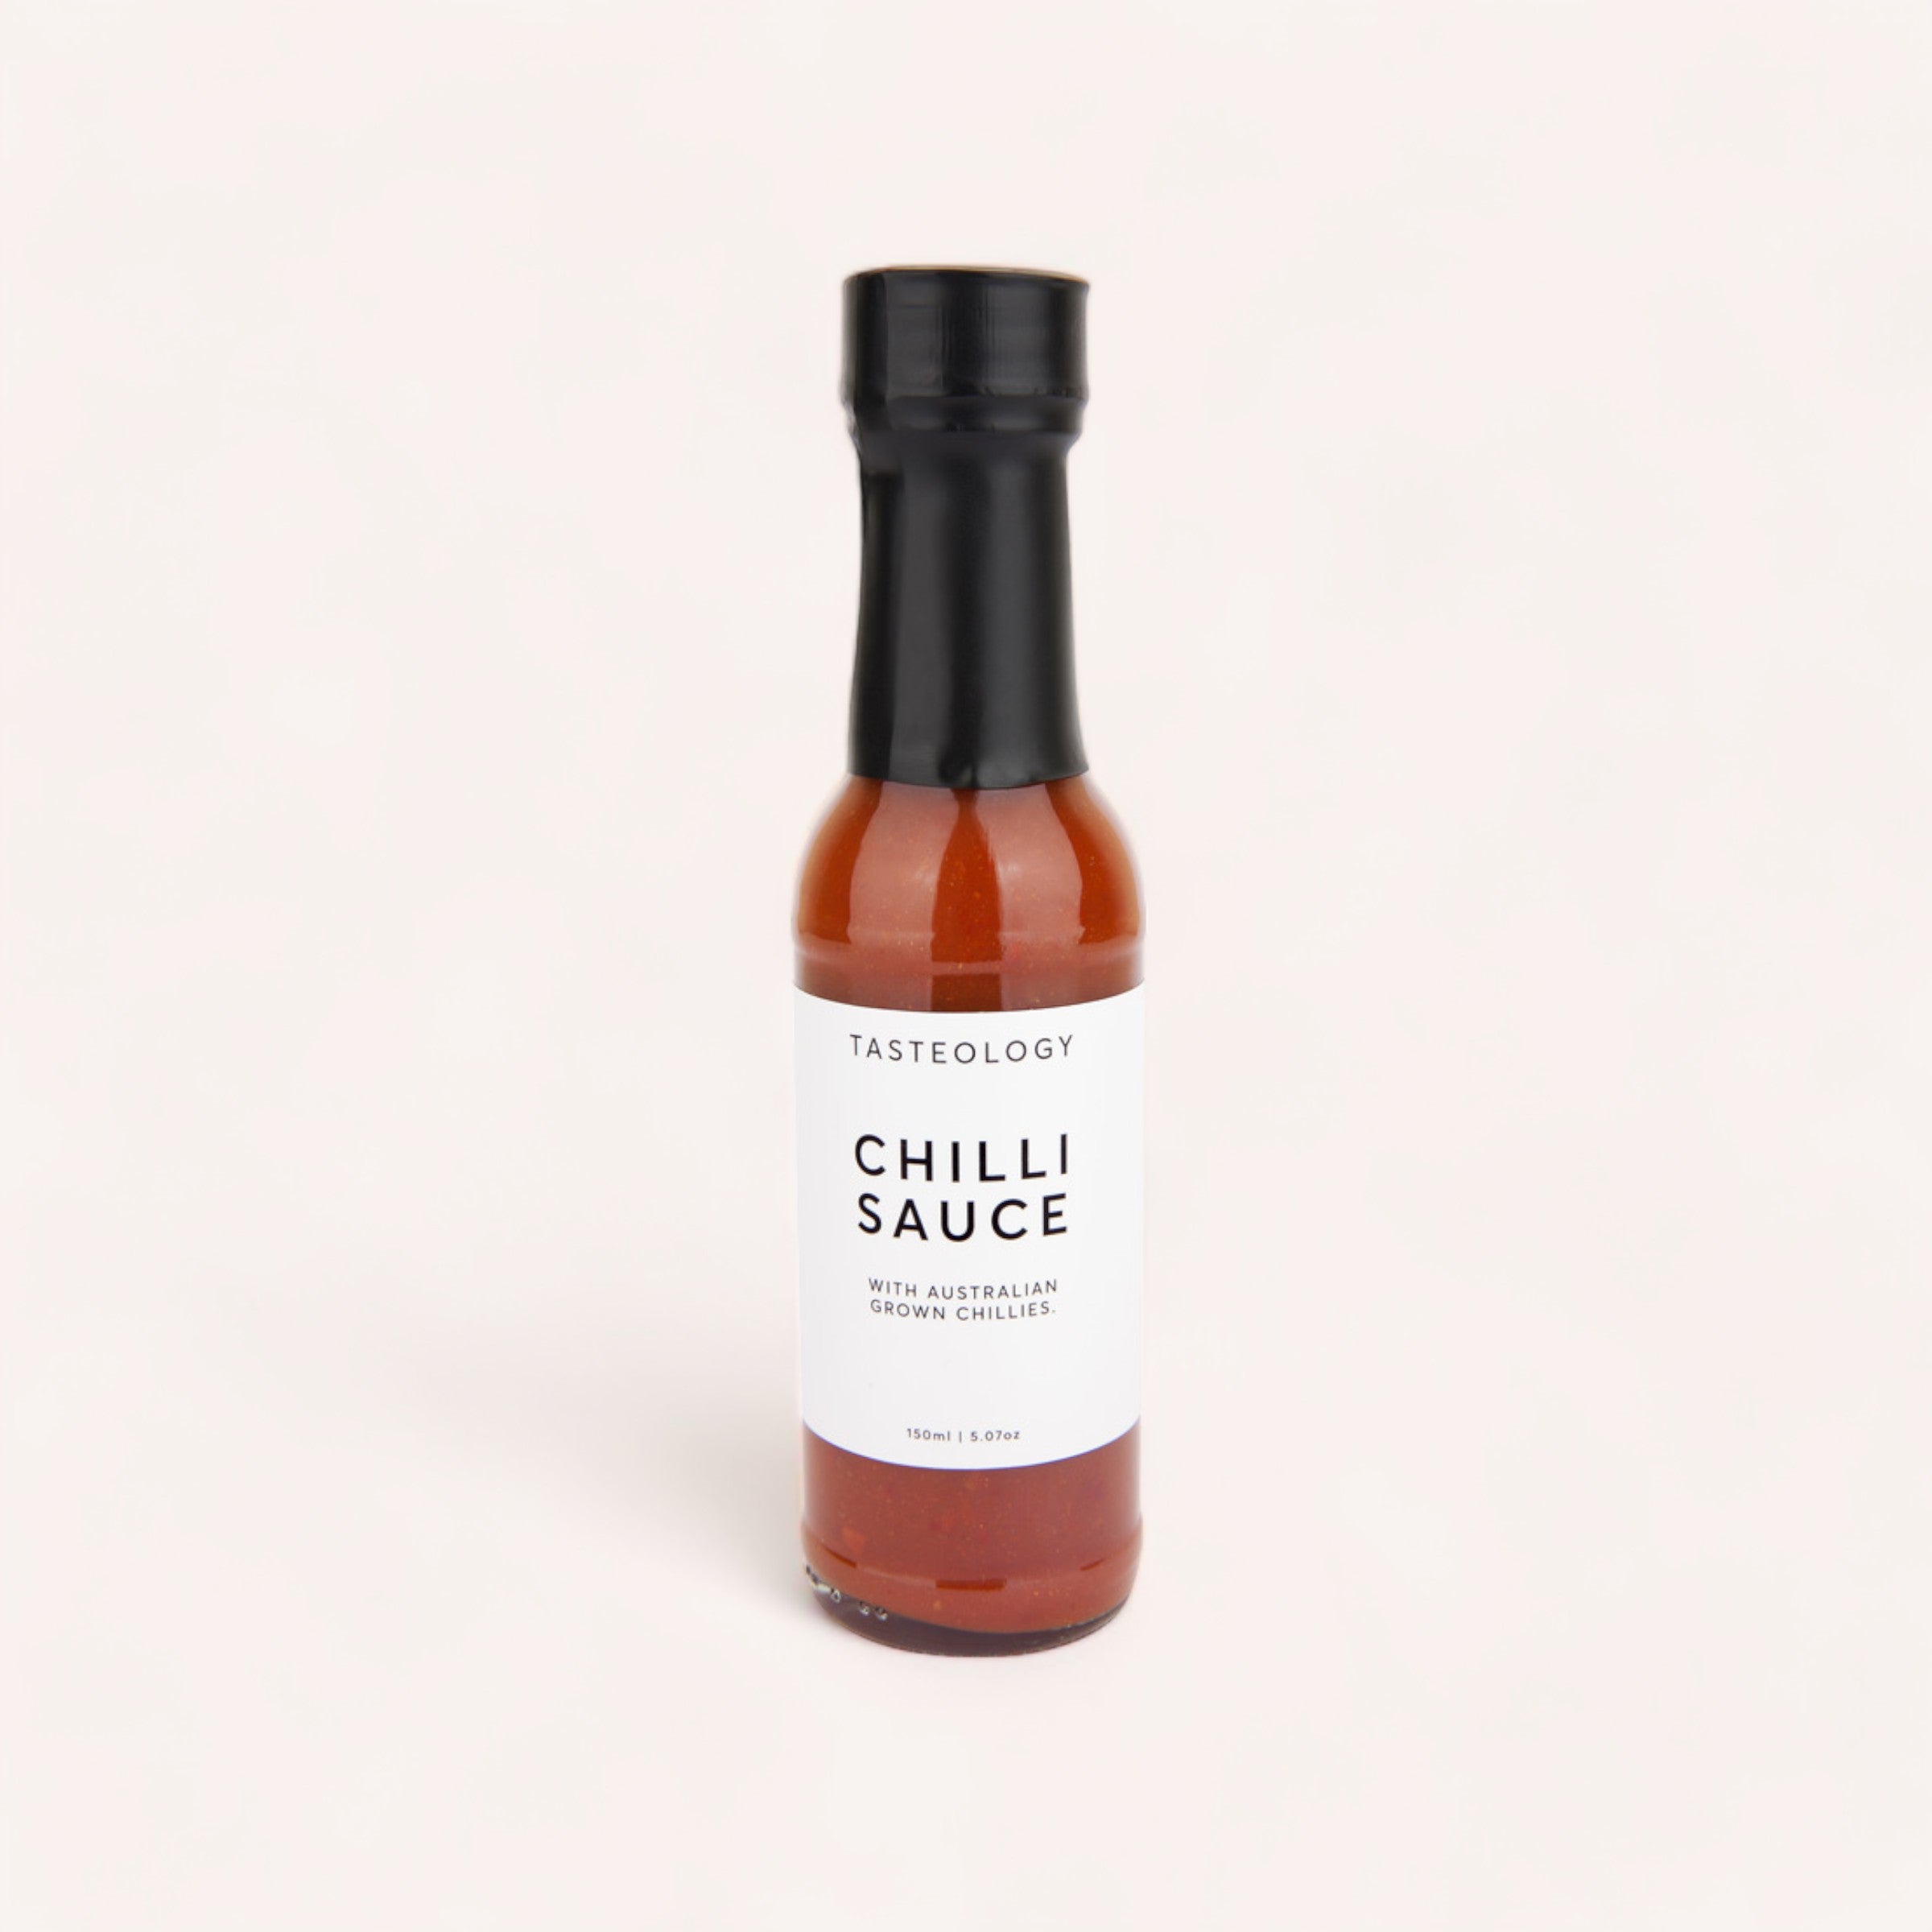 A bottle of Chilli Sauce by Tasteology with Australian grown chillies, ideal for BBQ meats, elegantly presented against a clean white background.